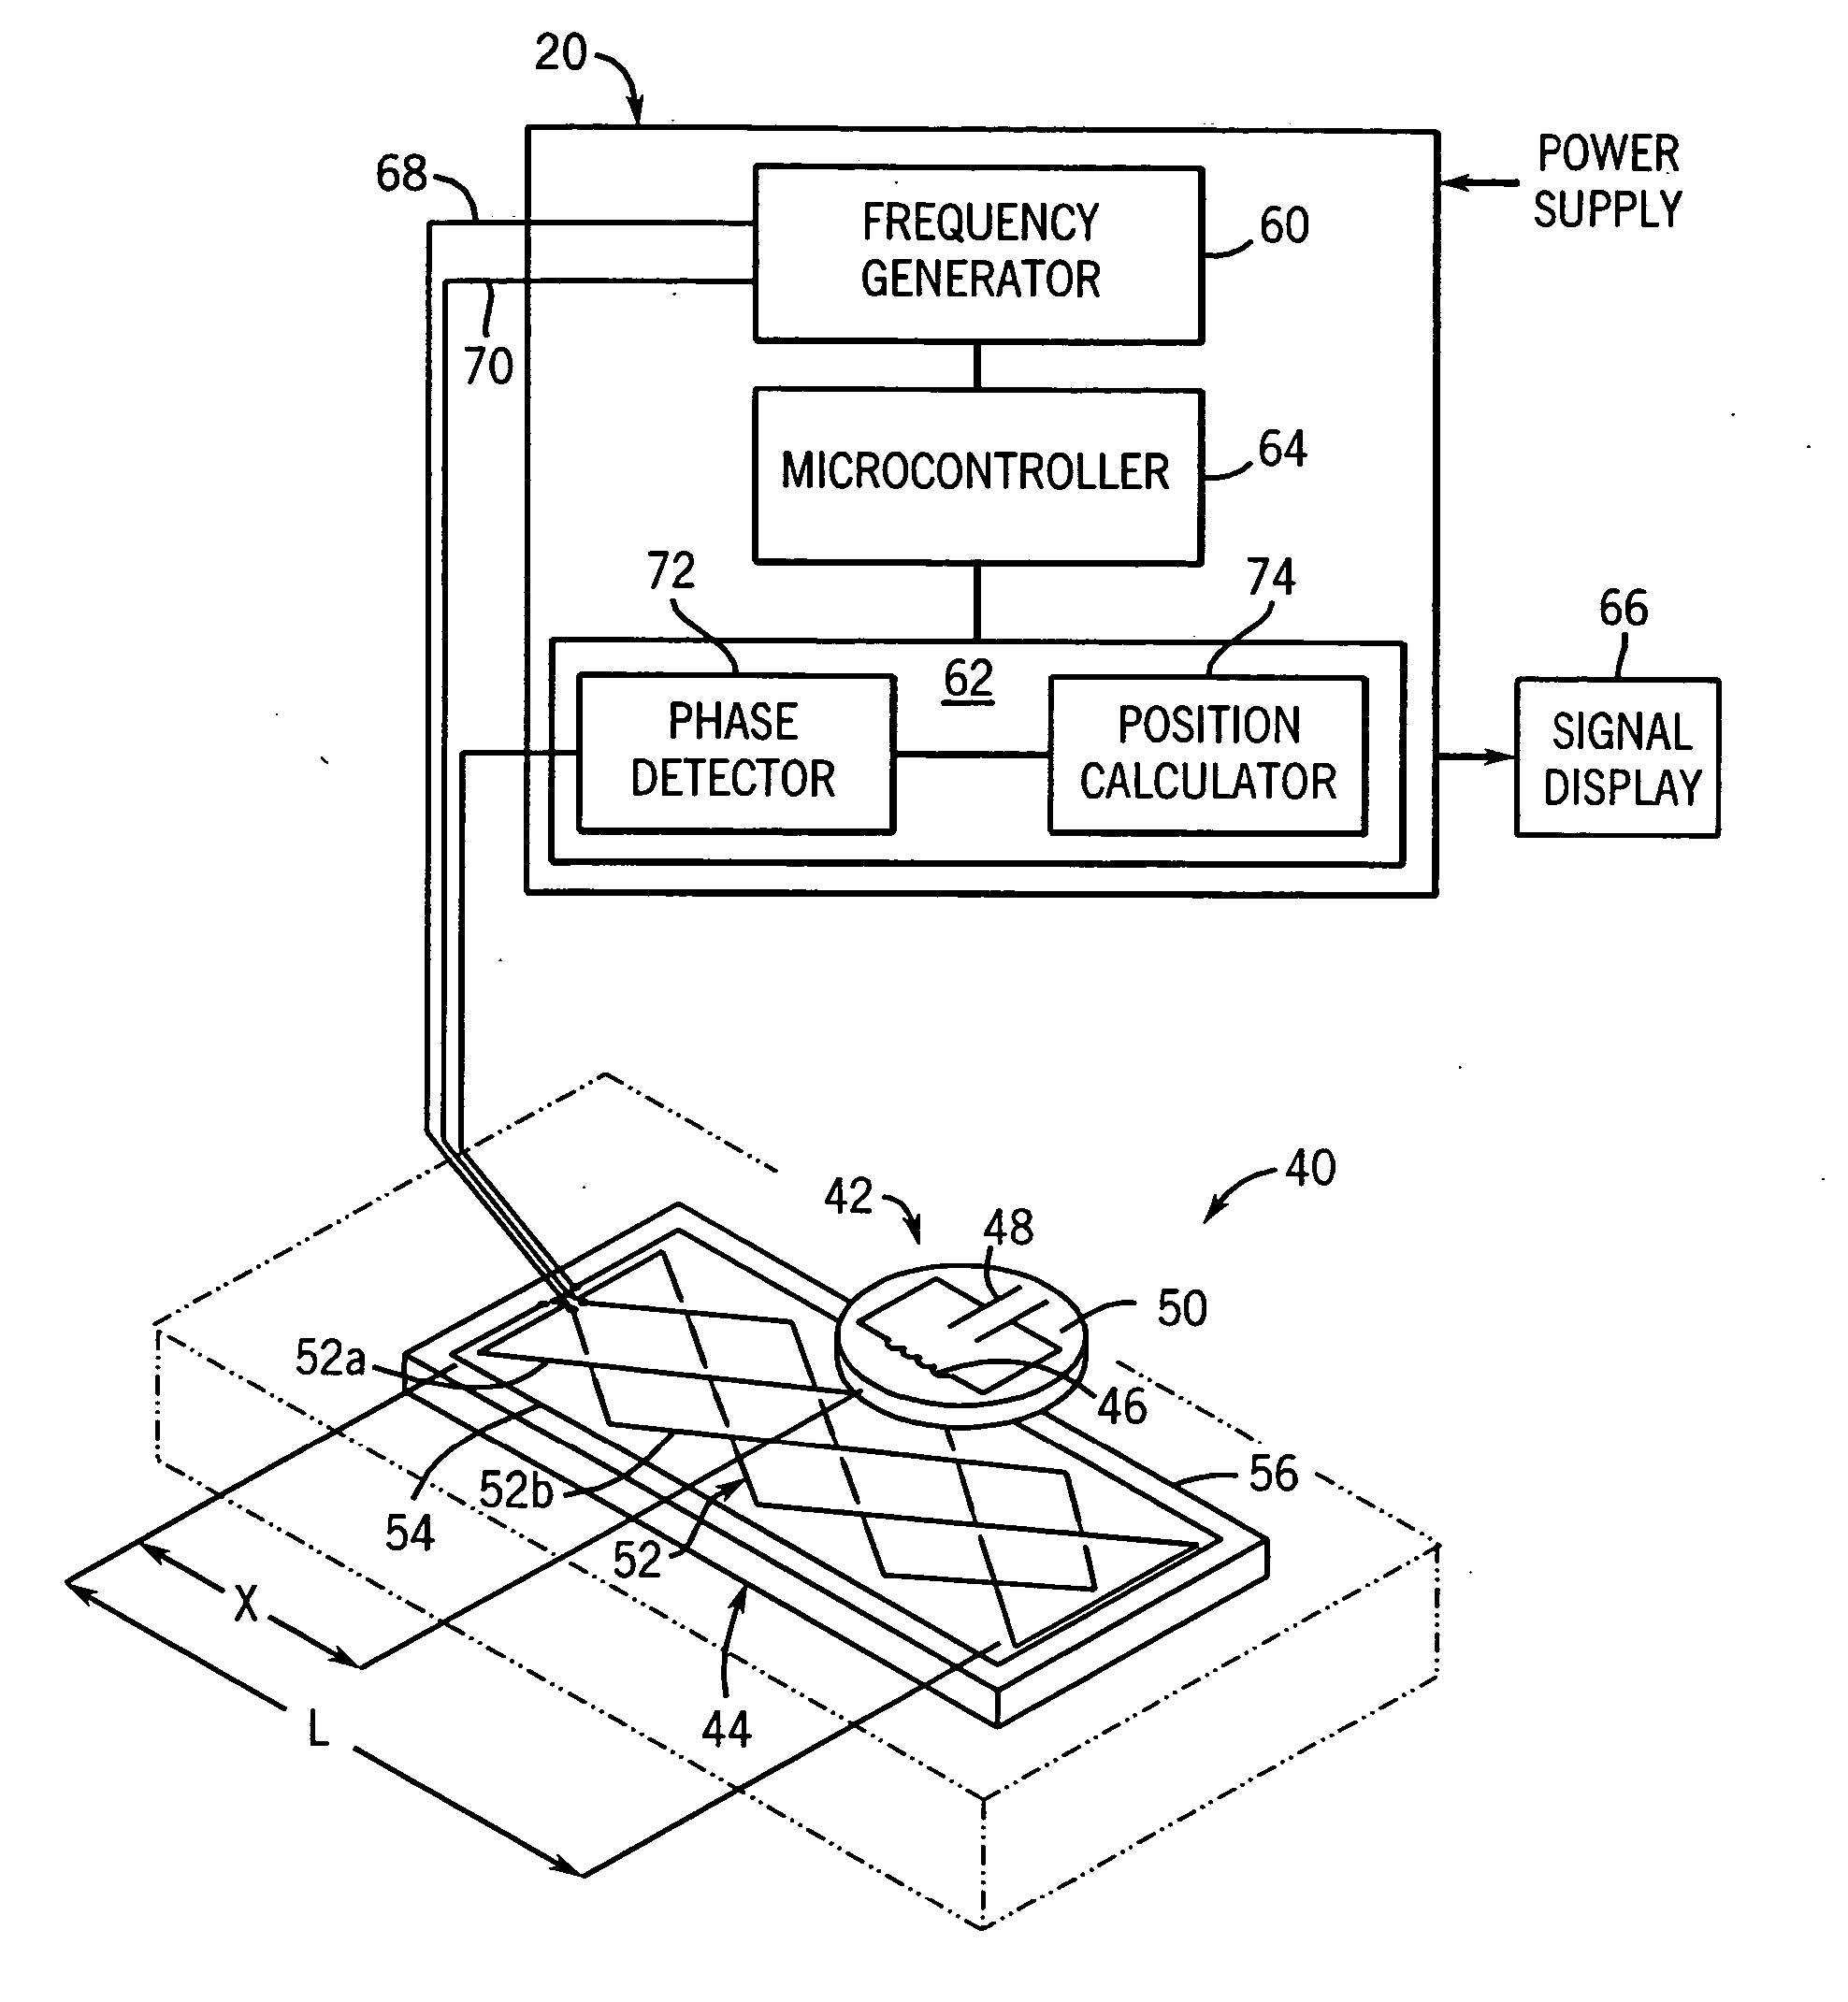 Parameter sensing system for an exercise device